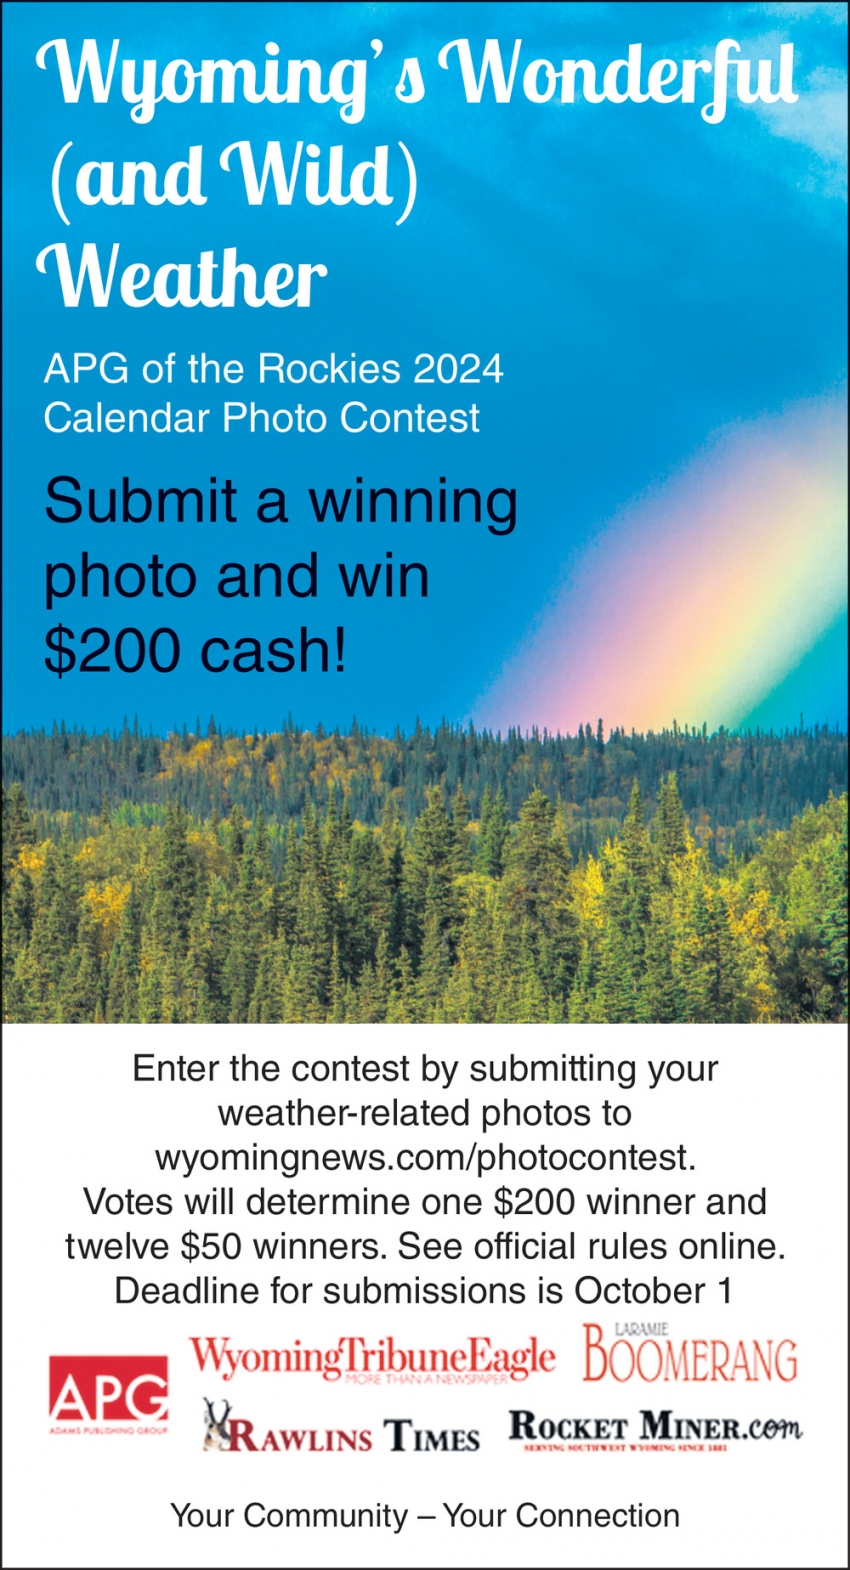 Submit a Winning Photo and Win $200 Cash!